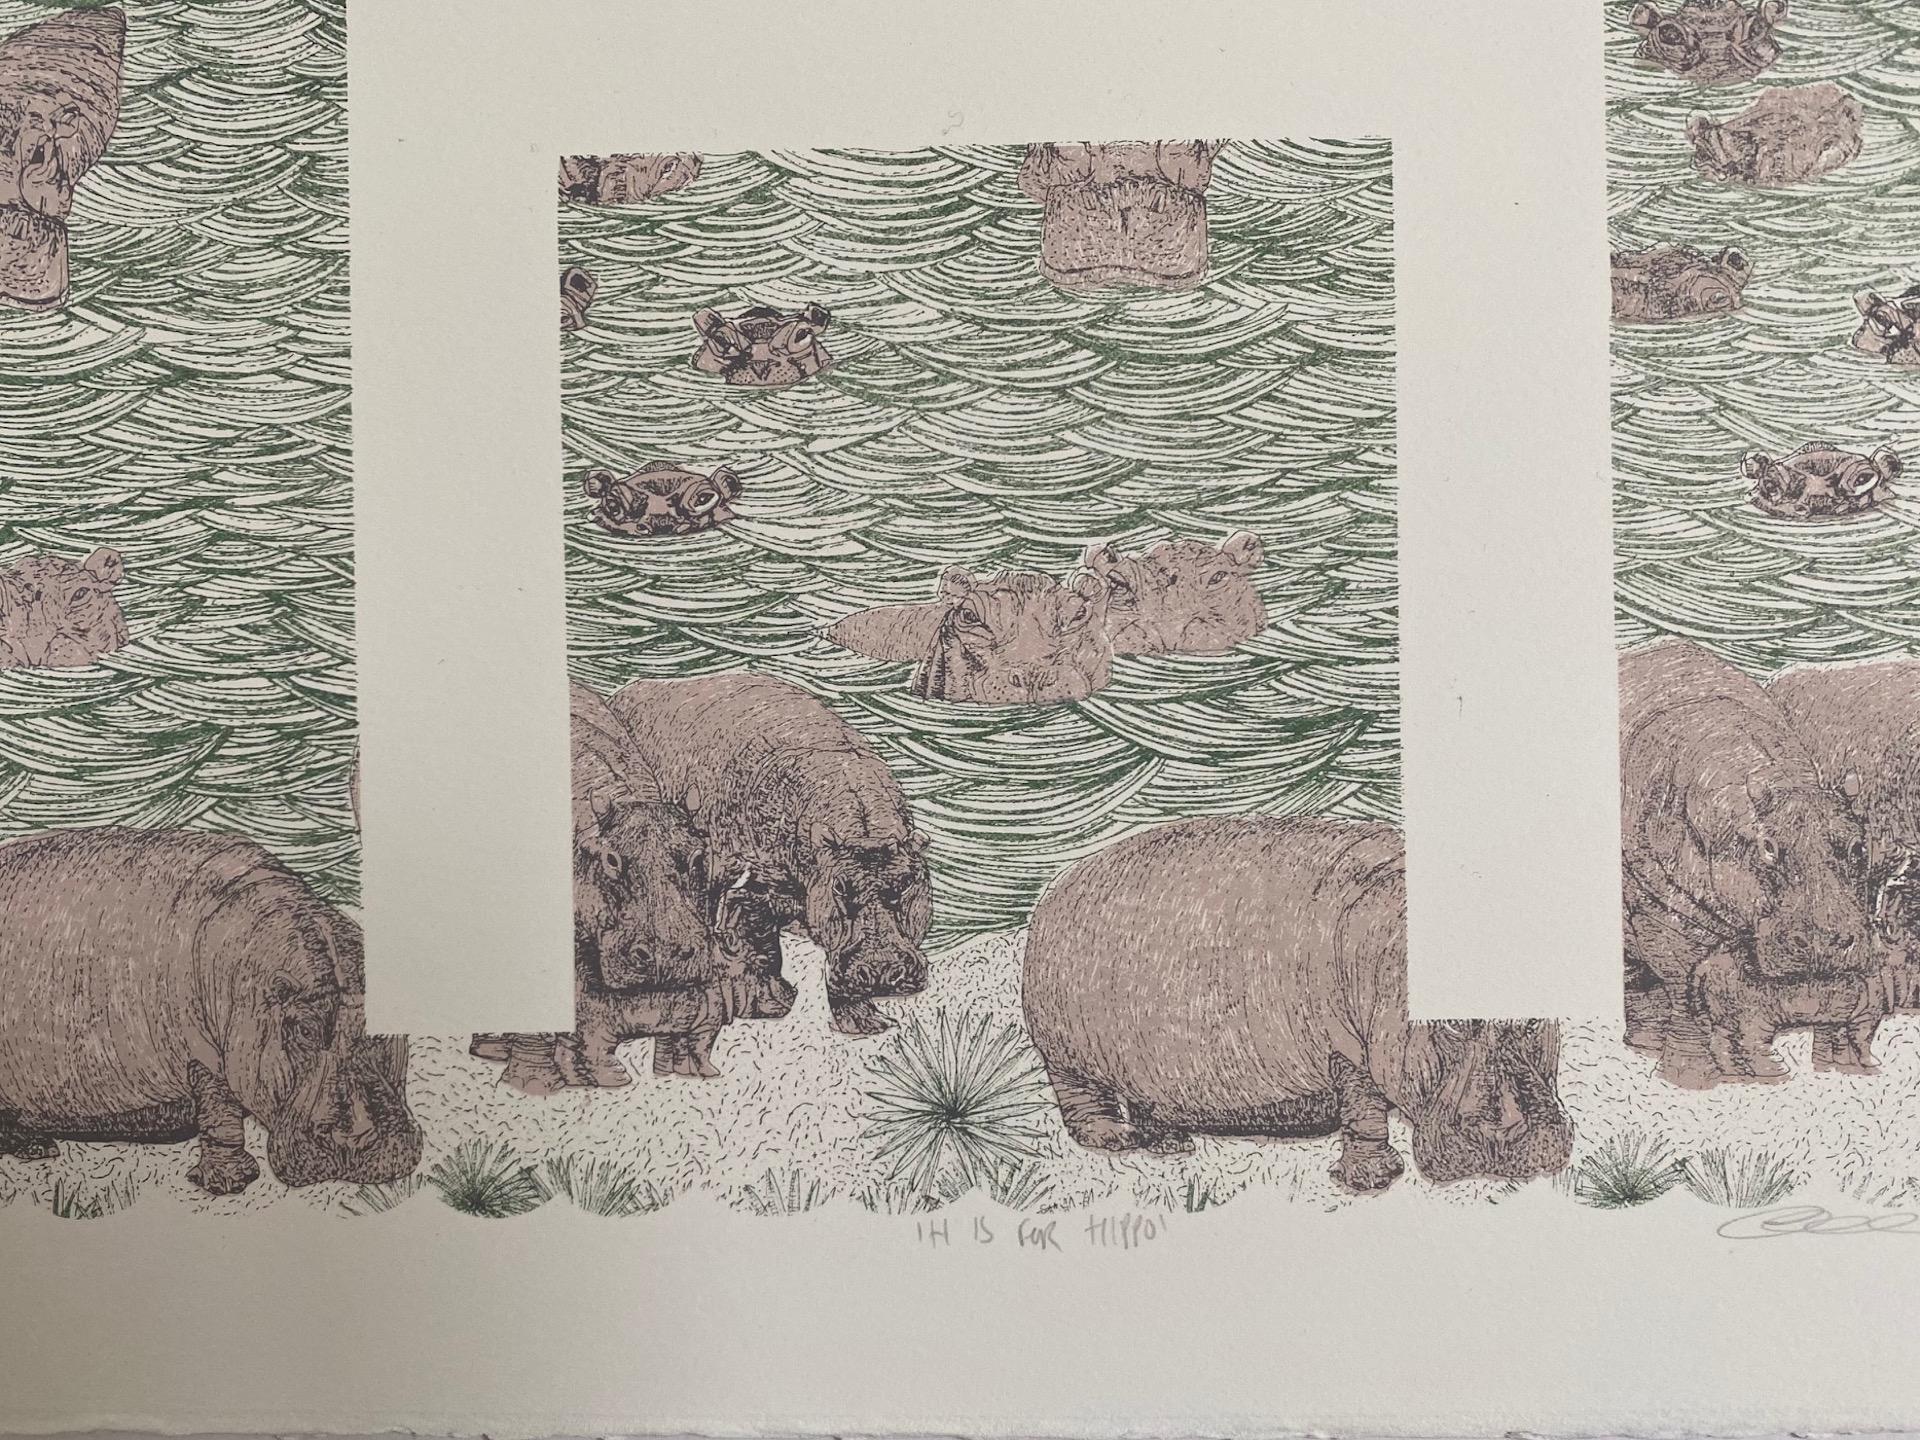 Clare Halifax, H is for Hippo, Limited Edition Artwork, Bright Art, Animal Art 4